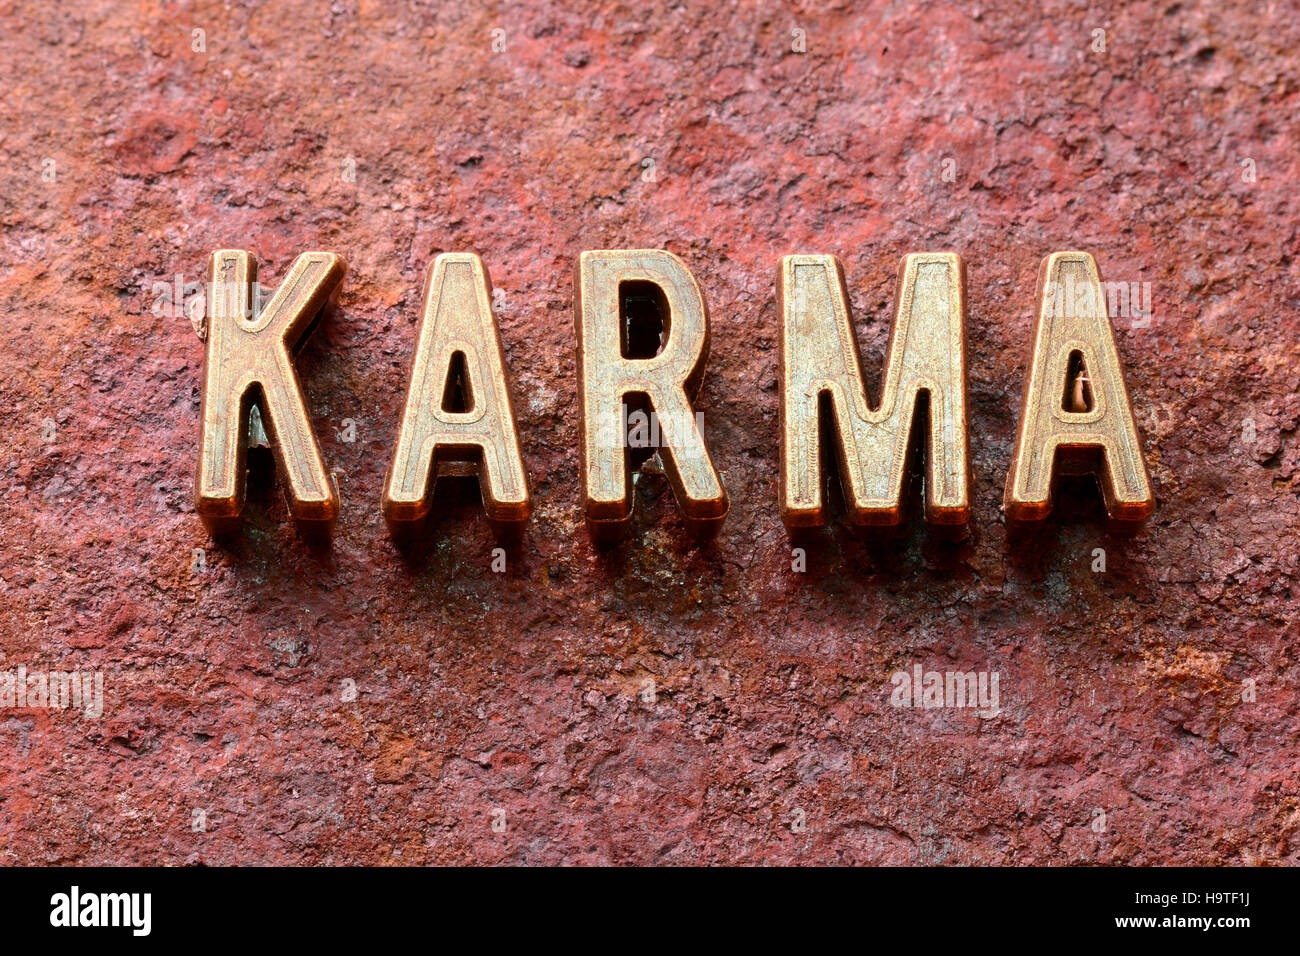 karma word made from metallic letters on red rusty surface Stock Photo